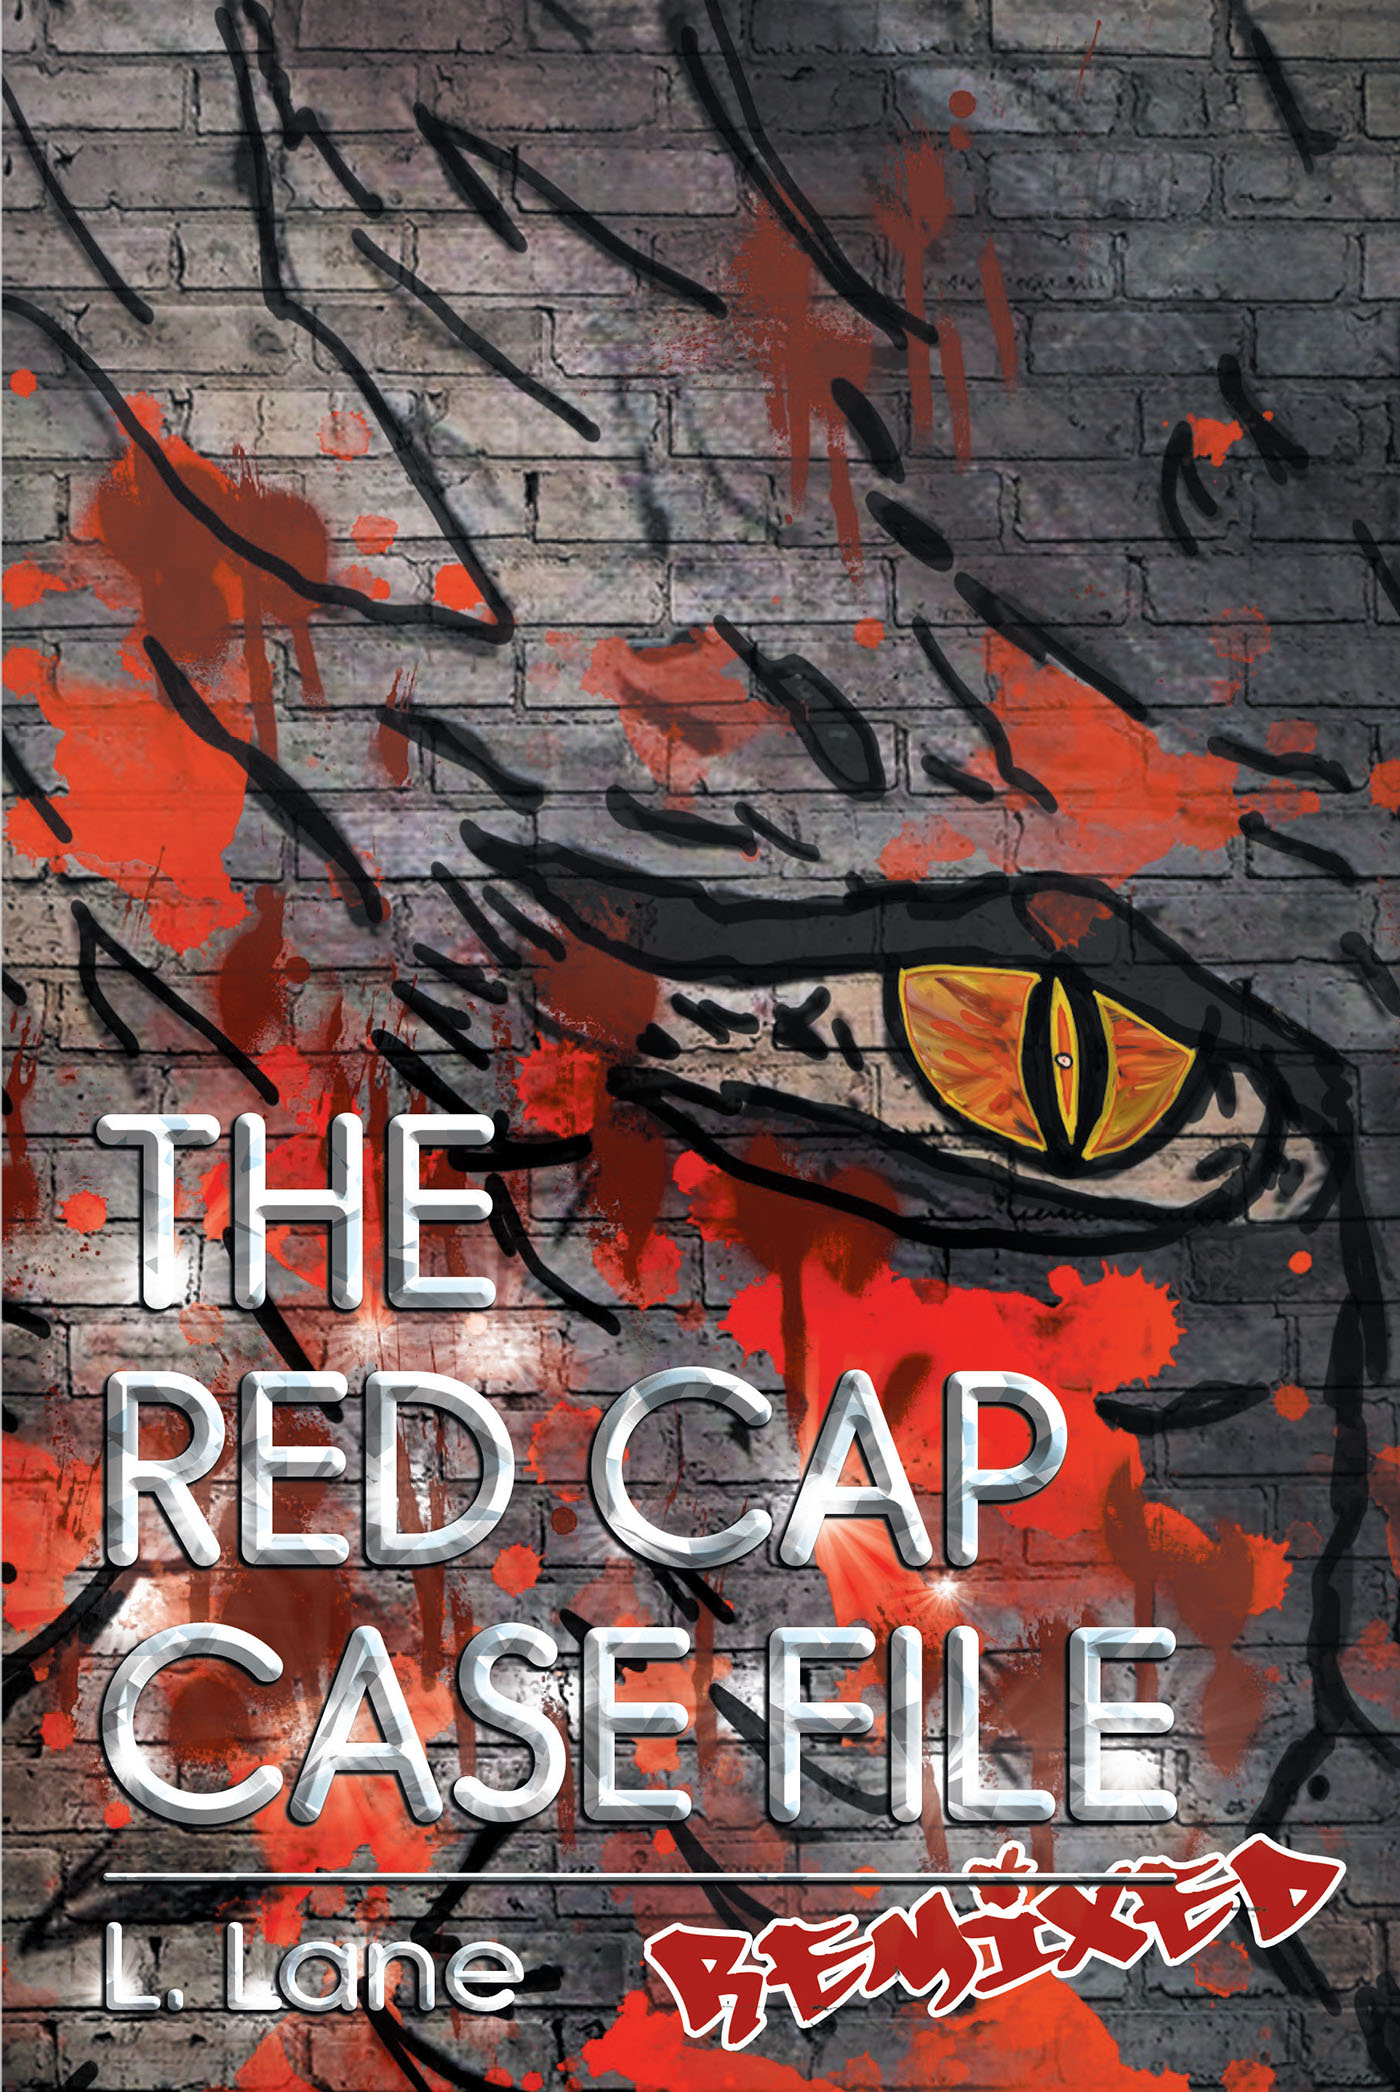 "The Red Cap Case Files: Remixed" Revisits the Cult Classic The Redcap Case Files Universe. Attached is Artwork from Previous Readers and a Novella with an Exciting Story